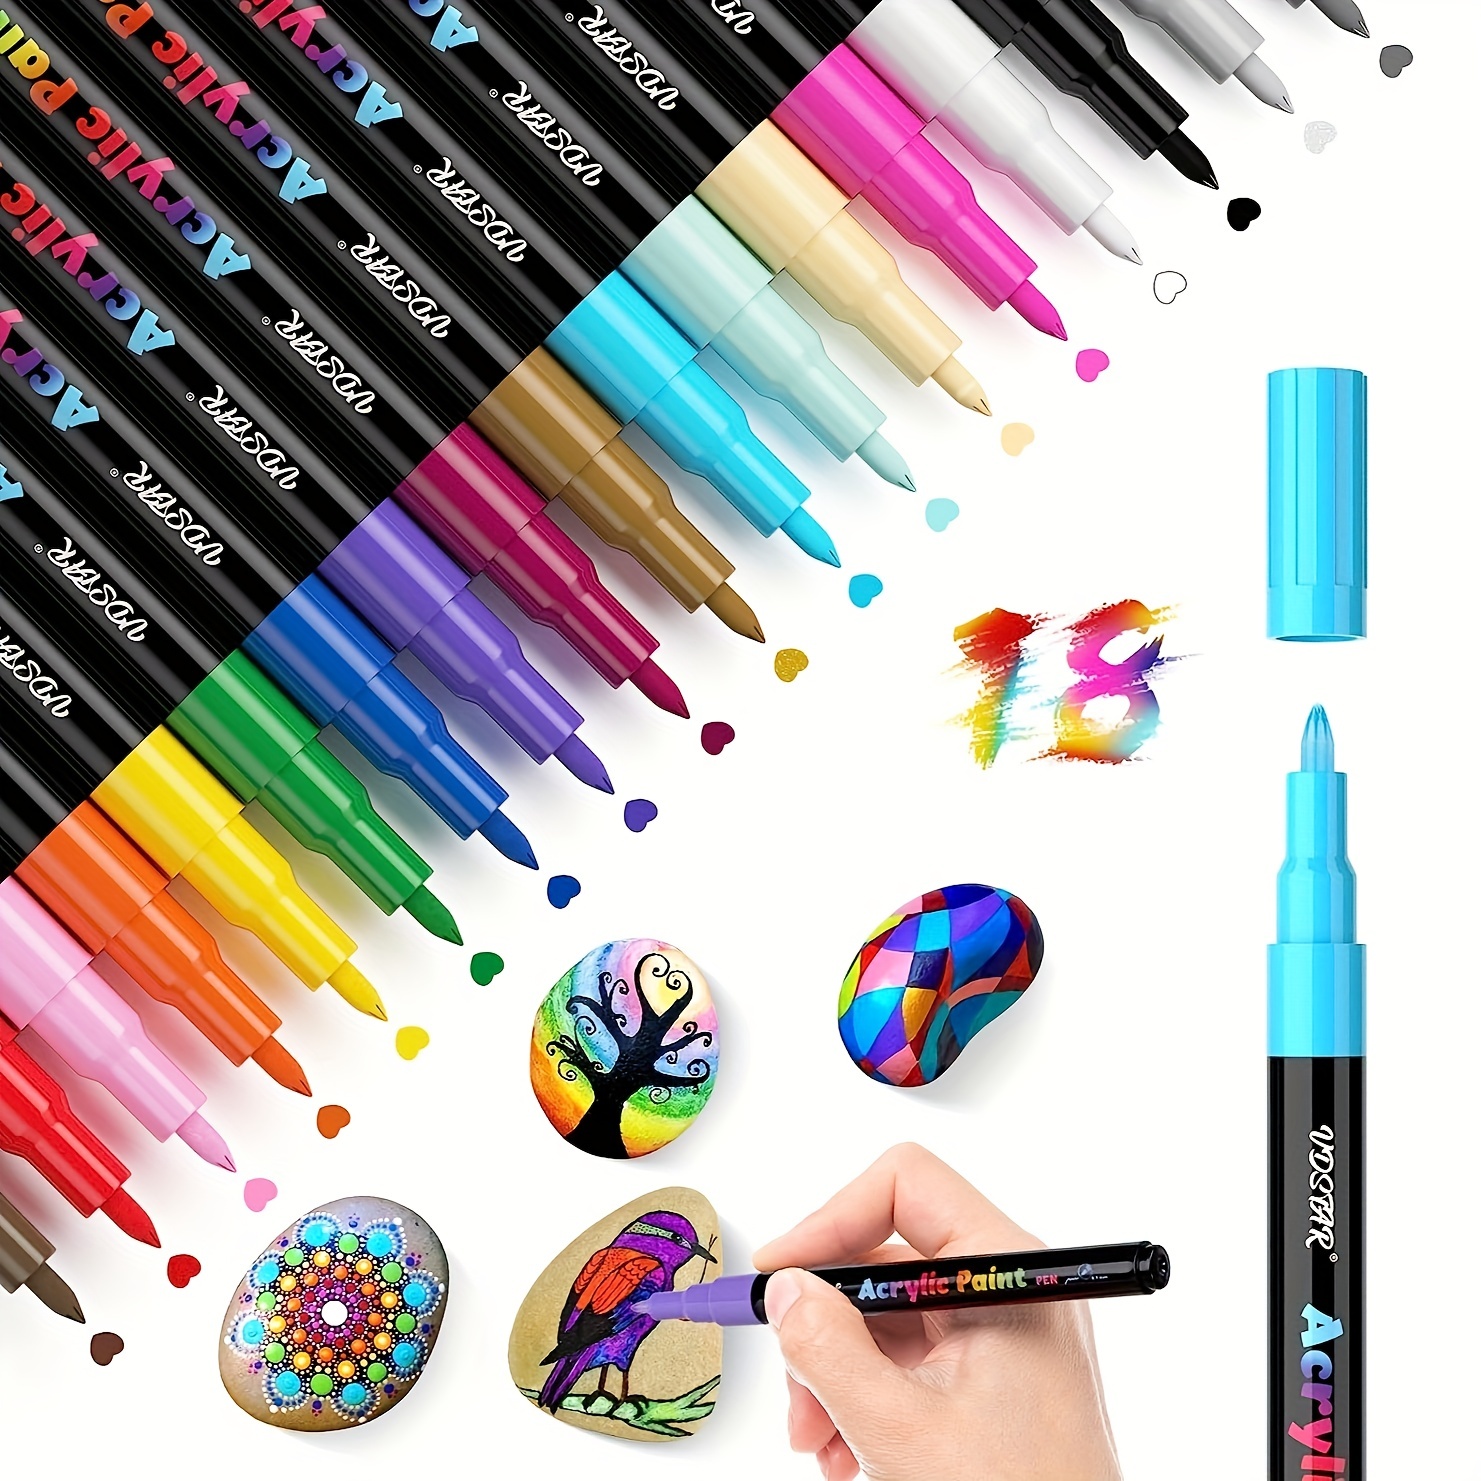 18 Pcs Acrylic Marker Pens, Waterproof ,Acrylic Pen For Rock Painting,  Stones And Eggs Glass, Wood, Canvas, Handcraft DIY Painting, Perfect For  Easter